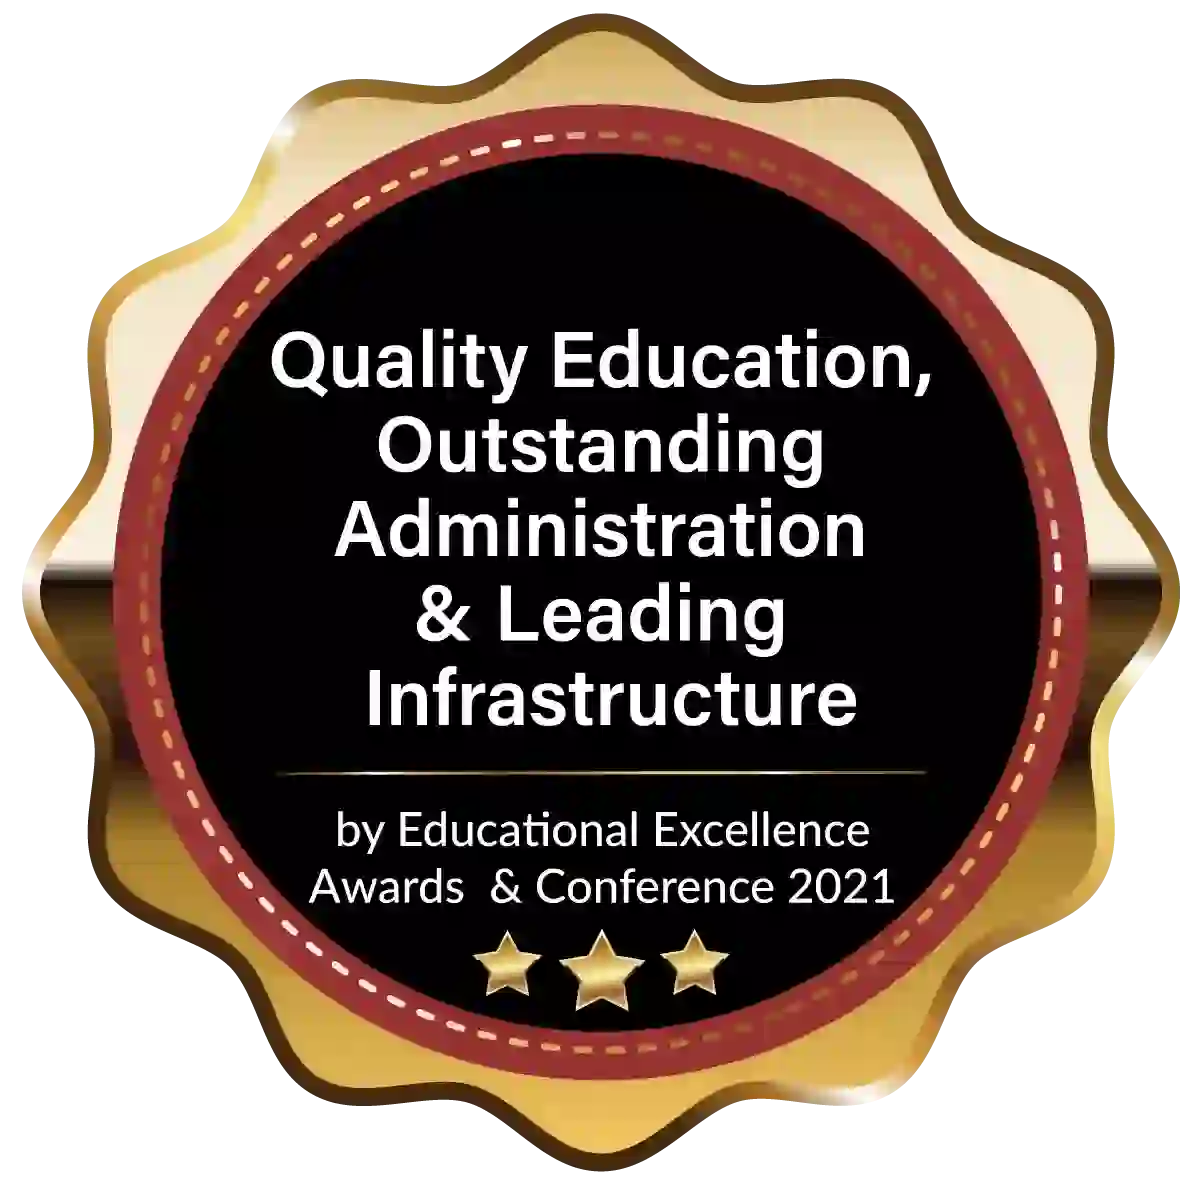 Quality Education, Outstanding Administration & Leading Infrastructure
                                                                        <small>by Educational Excellence Awards & Conference 2021